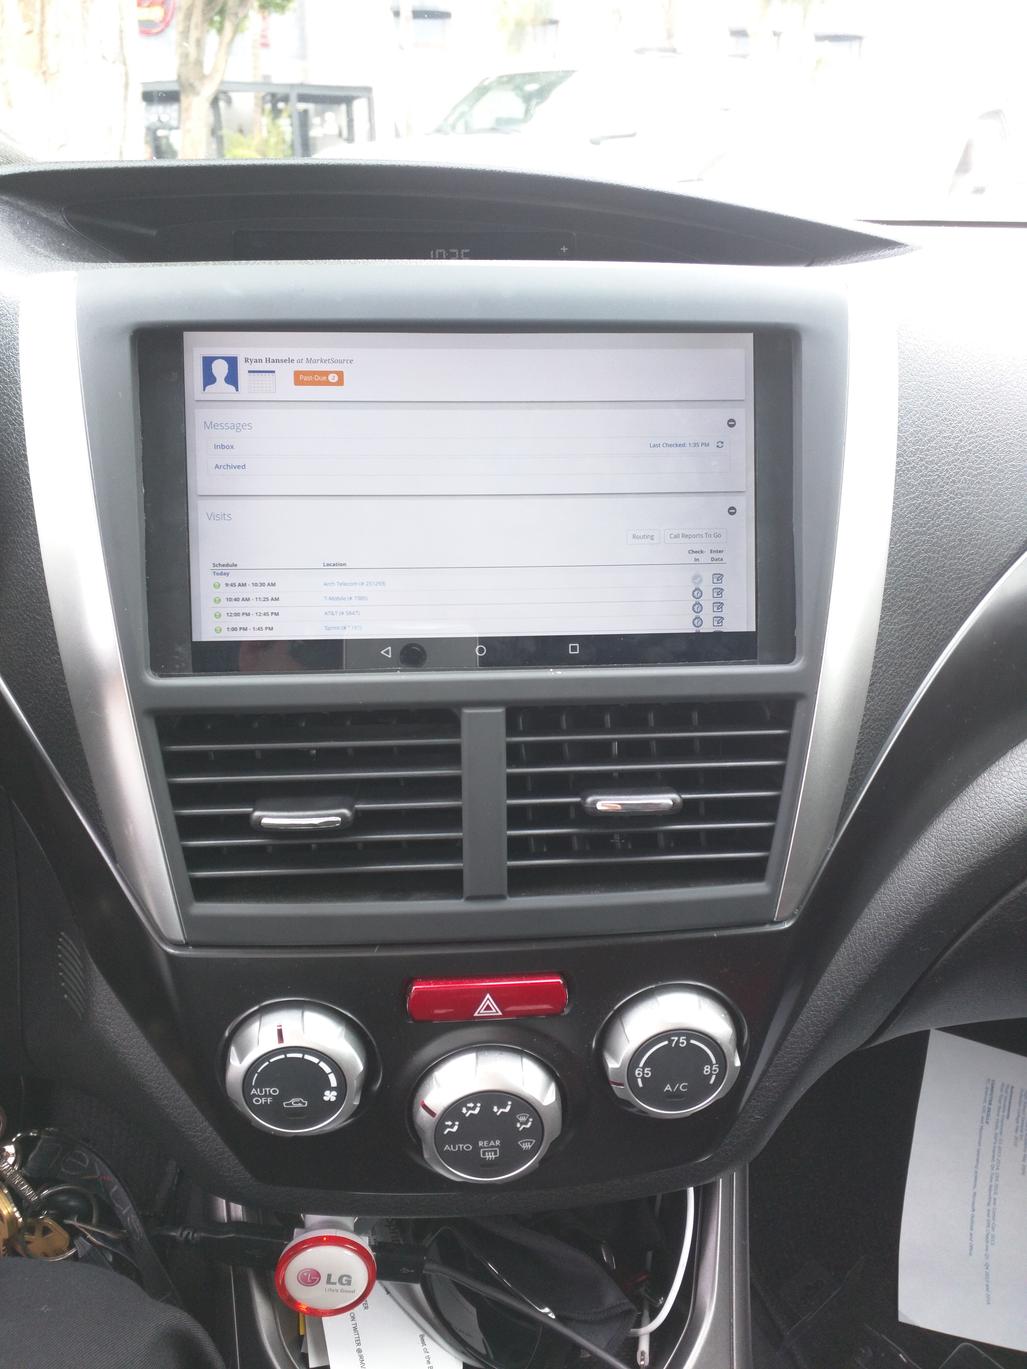 Who wants Apple CarPlay or Android Auto?-img_20150723_103546-jpg